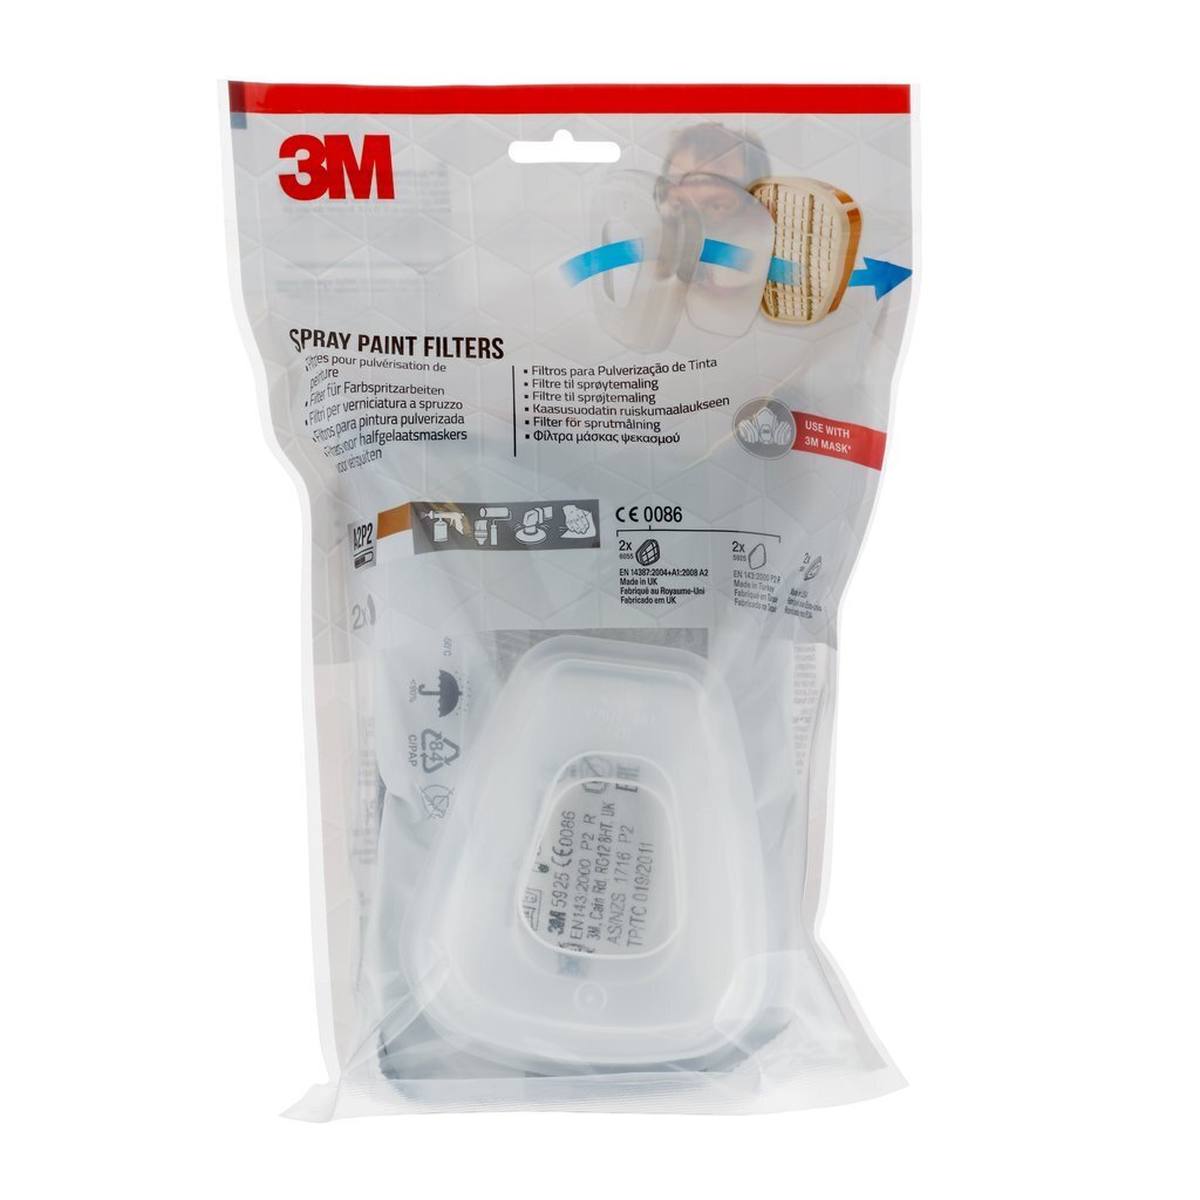 3M Refill set filter for paint spraying 6002 CR, 1 set=2x particle filter 5925 P2 - 2x activated carbon filter for gases 6055 A2 - 2x filter housing cover 501